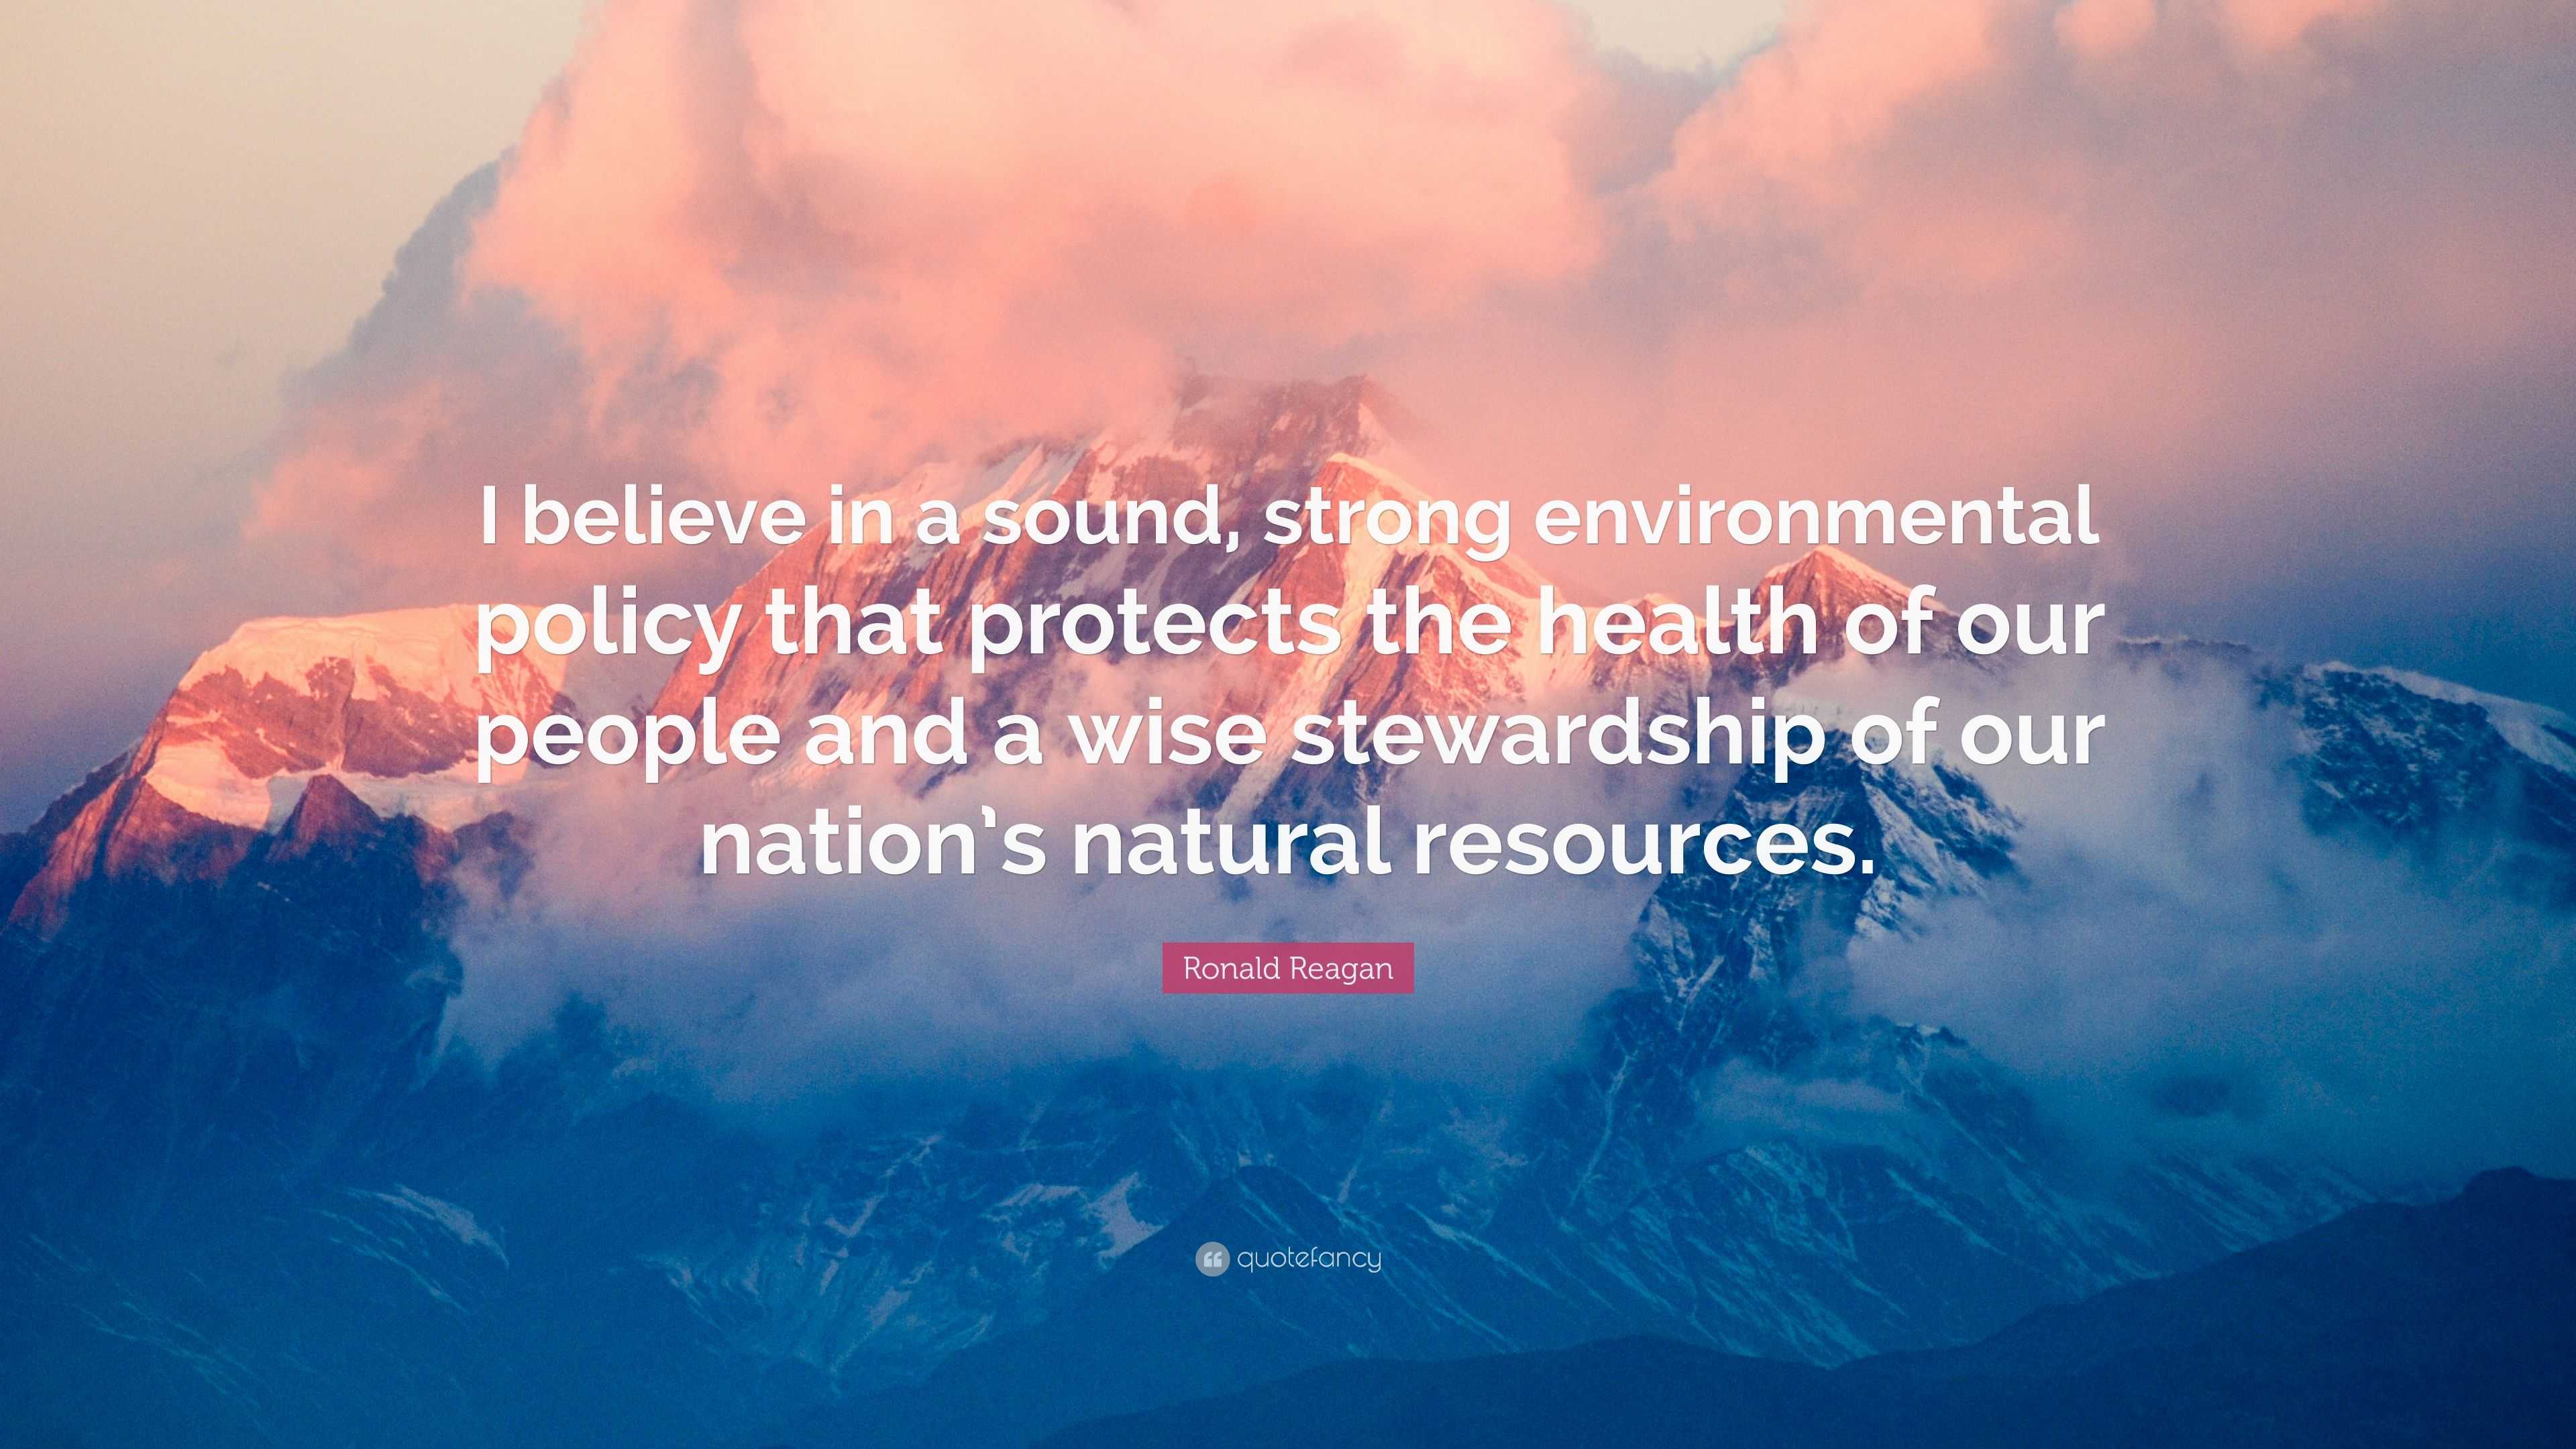 Ronald Reagan Quote: “I believe in a sound, strong environmental policy